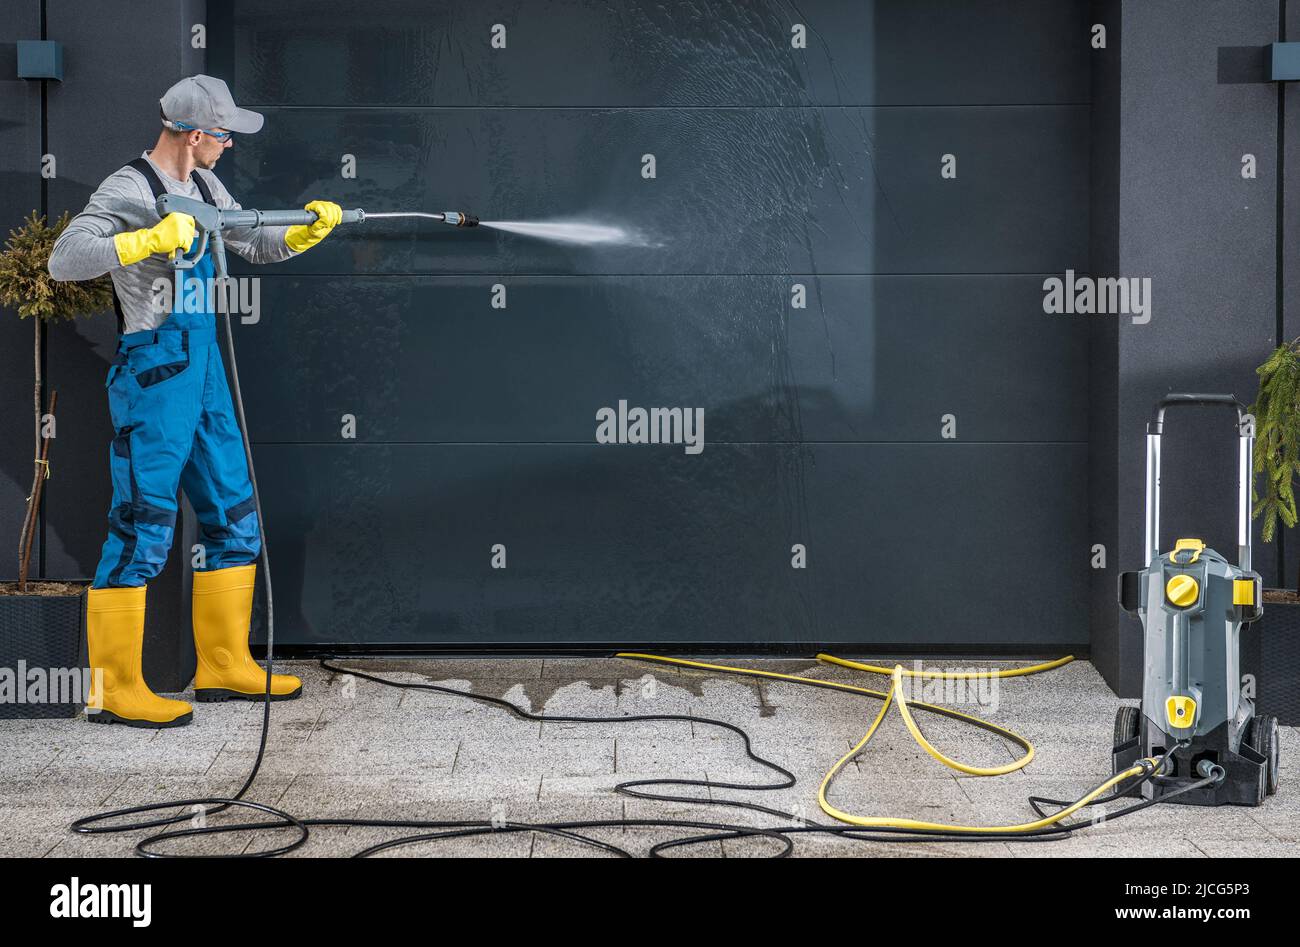 Caucasian Men in His 40s Powerful Pressure Washing Residential Garage Doors. Using Pressurized Water Jet to Clean Heavy Dirt. Stock Photo